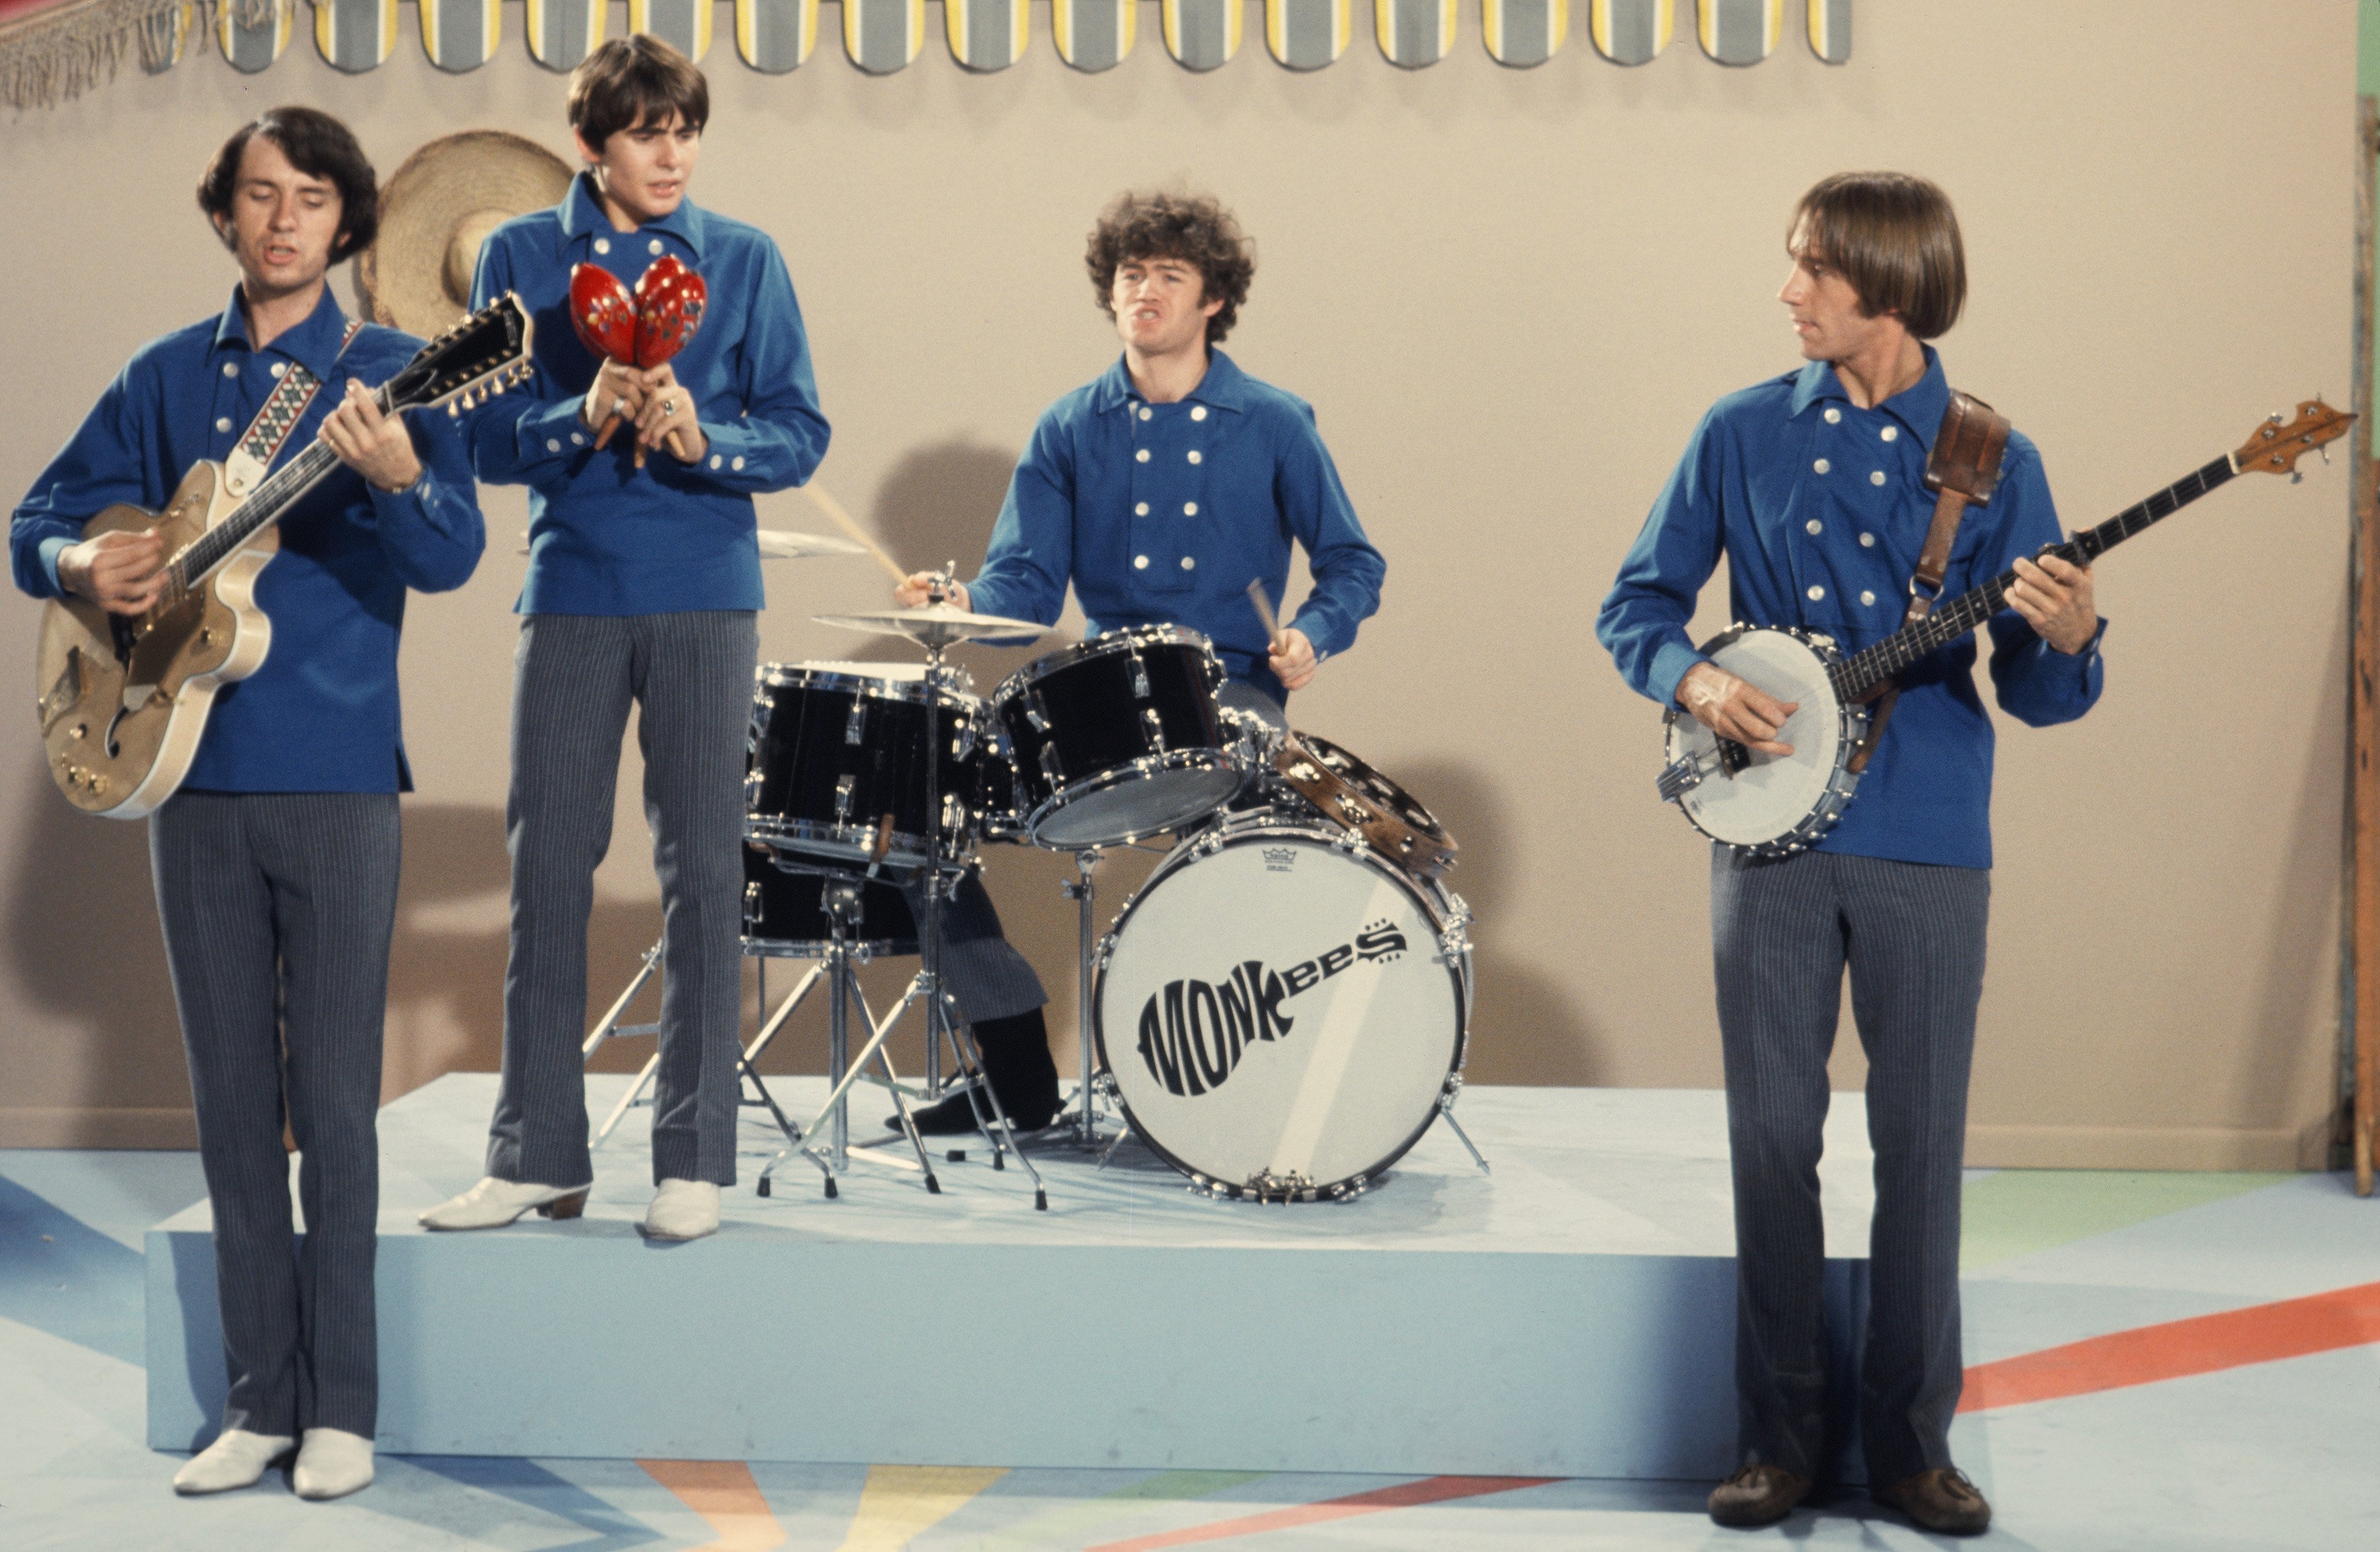 The Monkees' Mike Nesmith, Davy Jones, Micky Dolenz, and Peter Tork playing songs